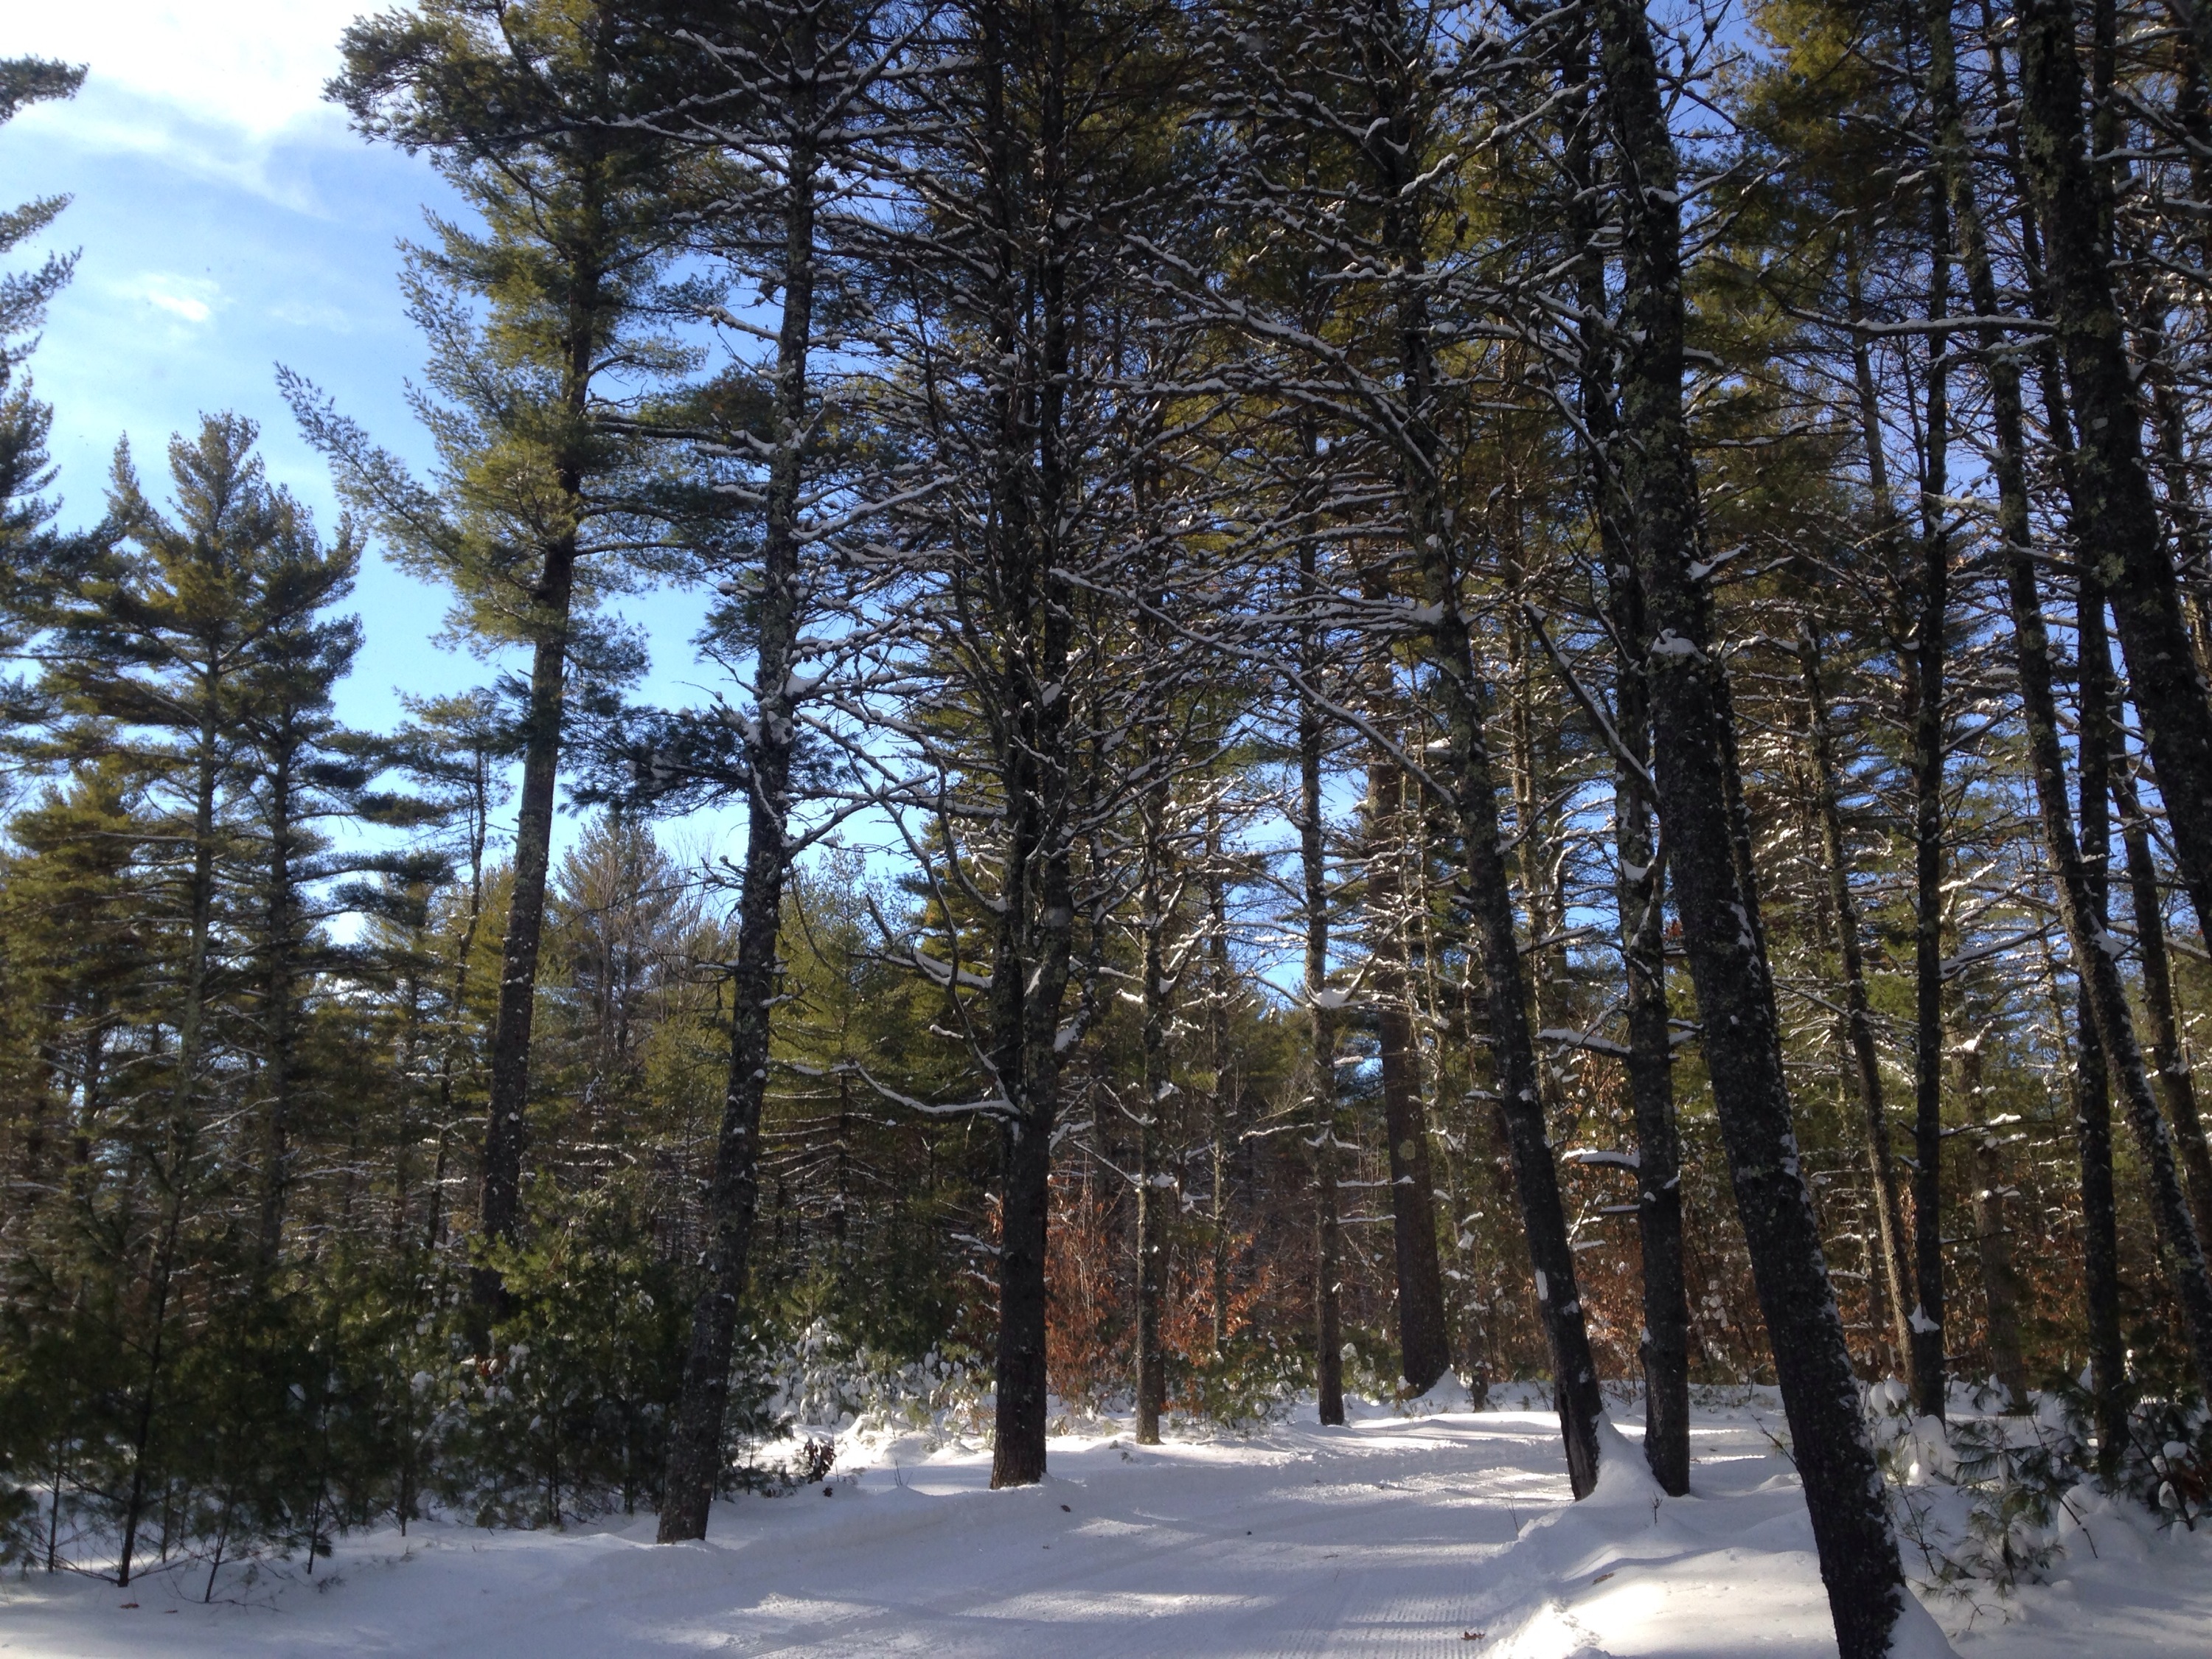 Libby Hill Forest Cross-Country Ski Trails, Gray, Maine